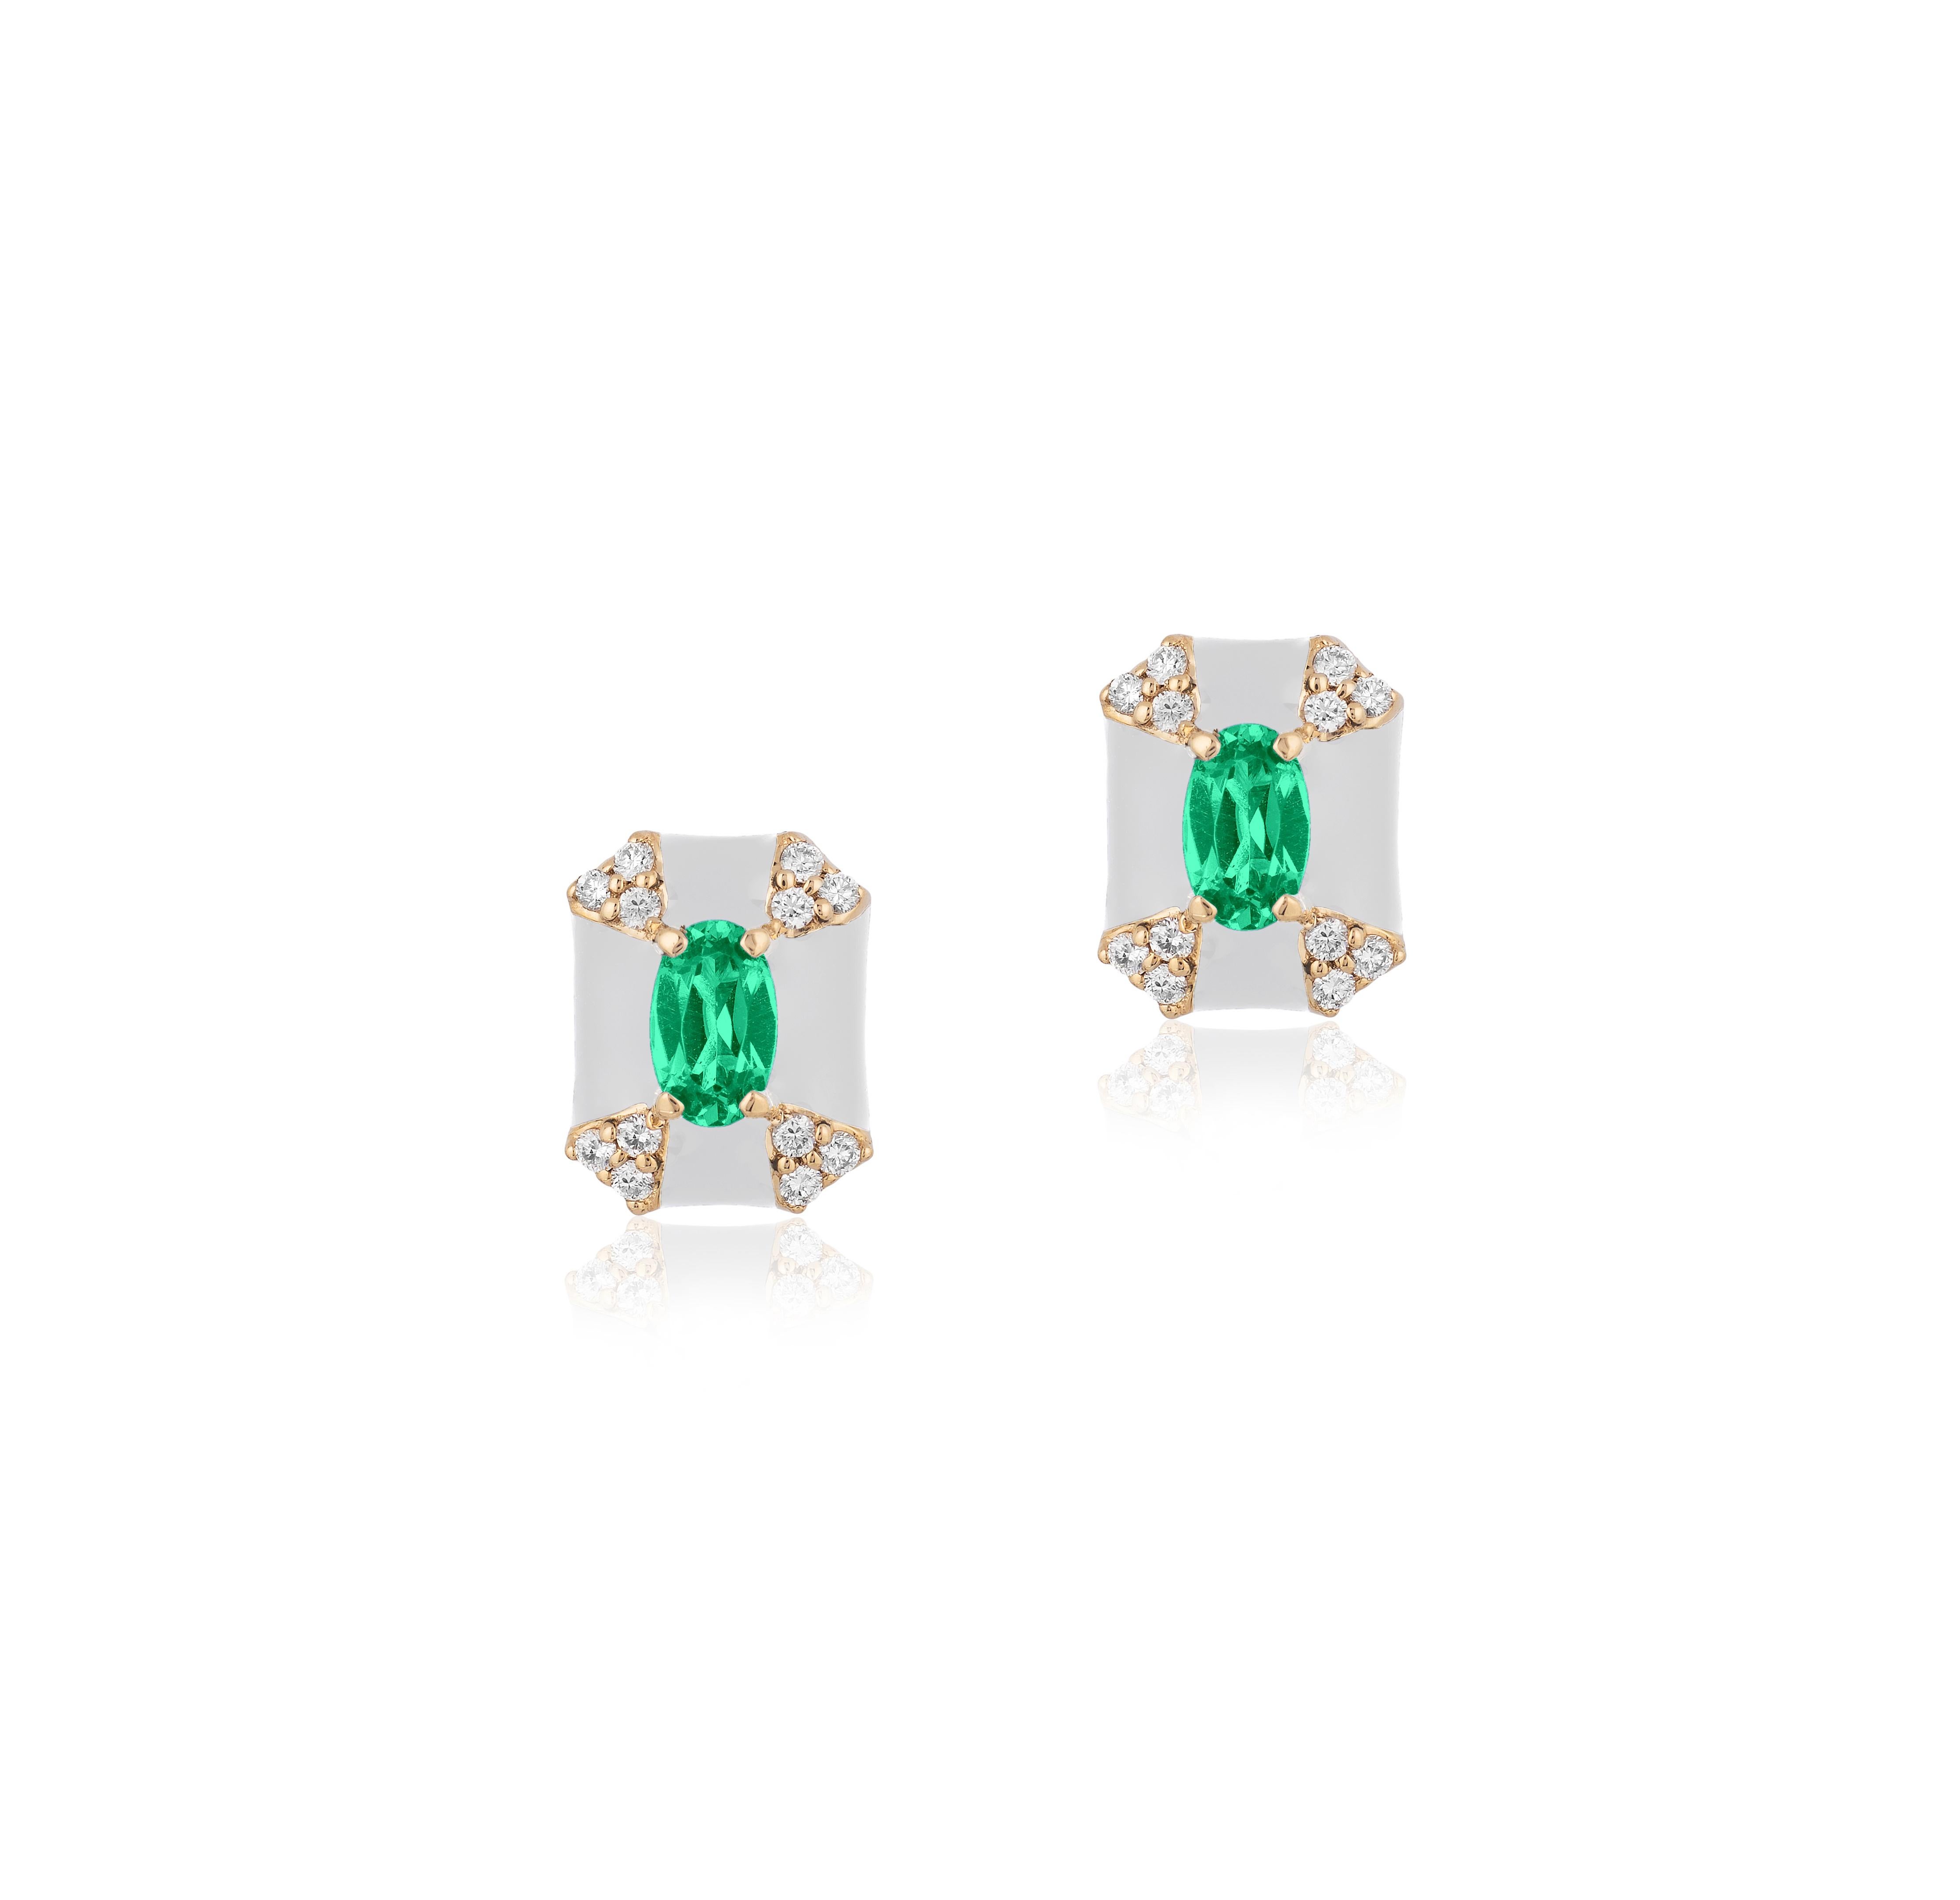 'Queen' Octagon White Enamel Stud Earrings with Emerald and Diamonds in 18K Yellow Gold.
Stone Size: 4 mm
Gemstone Approx. Wt: Emerald- 0.39 Carats 
Diamonds: G-H / VS, Approx. Wt: 0.14 Carats